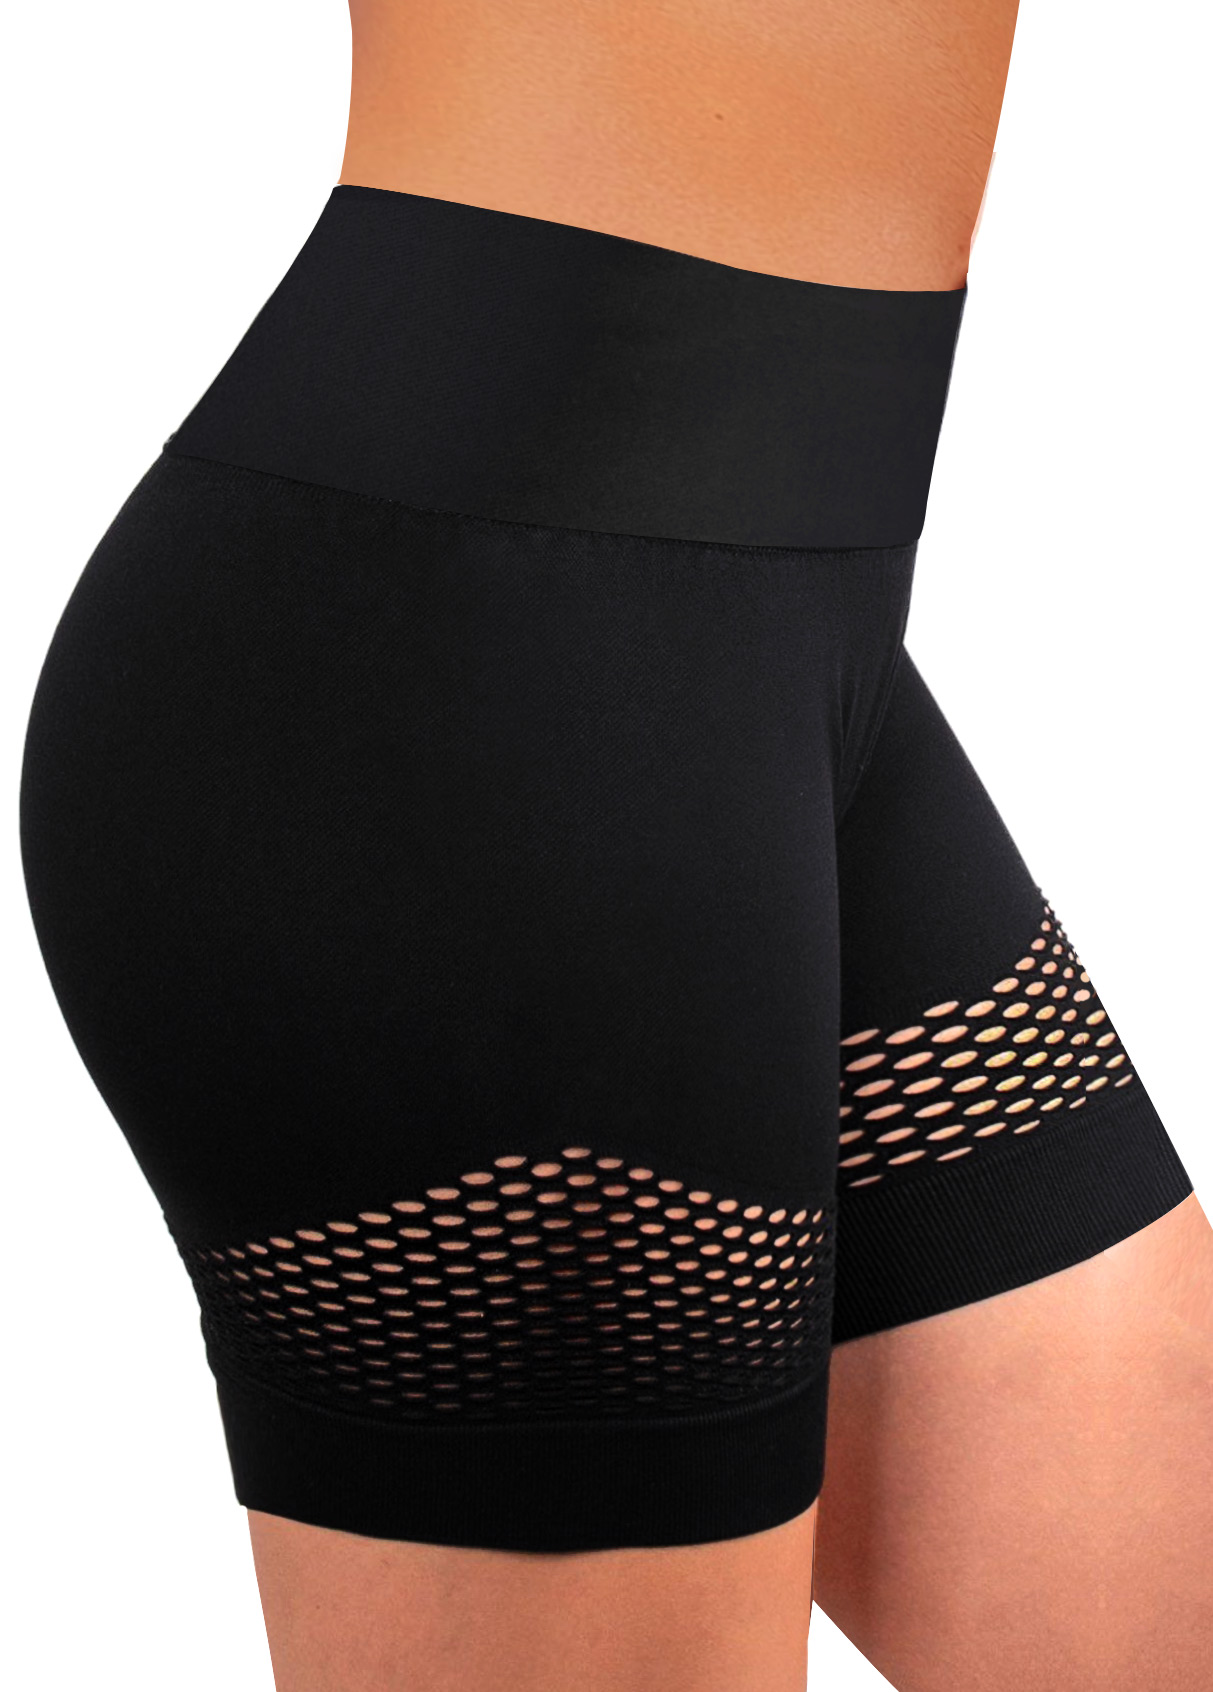 Hollow Out High Waisted Black Swim Shorts